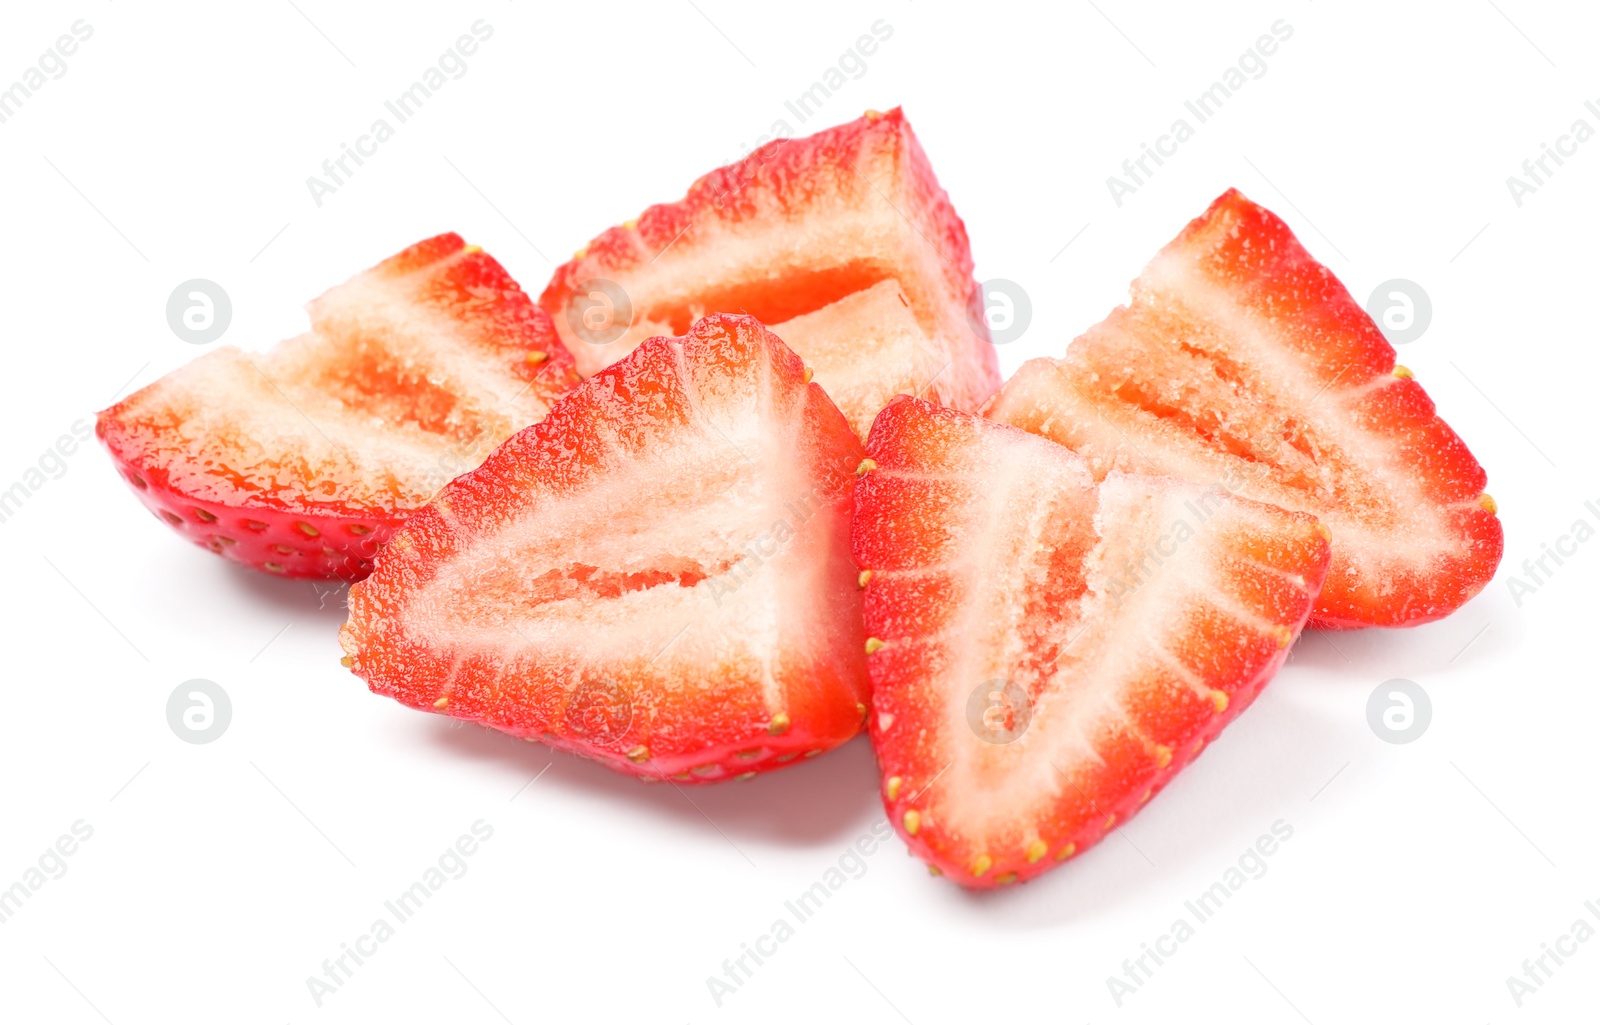 Photo of Halves of delicious fresh strawberries on white background